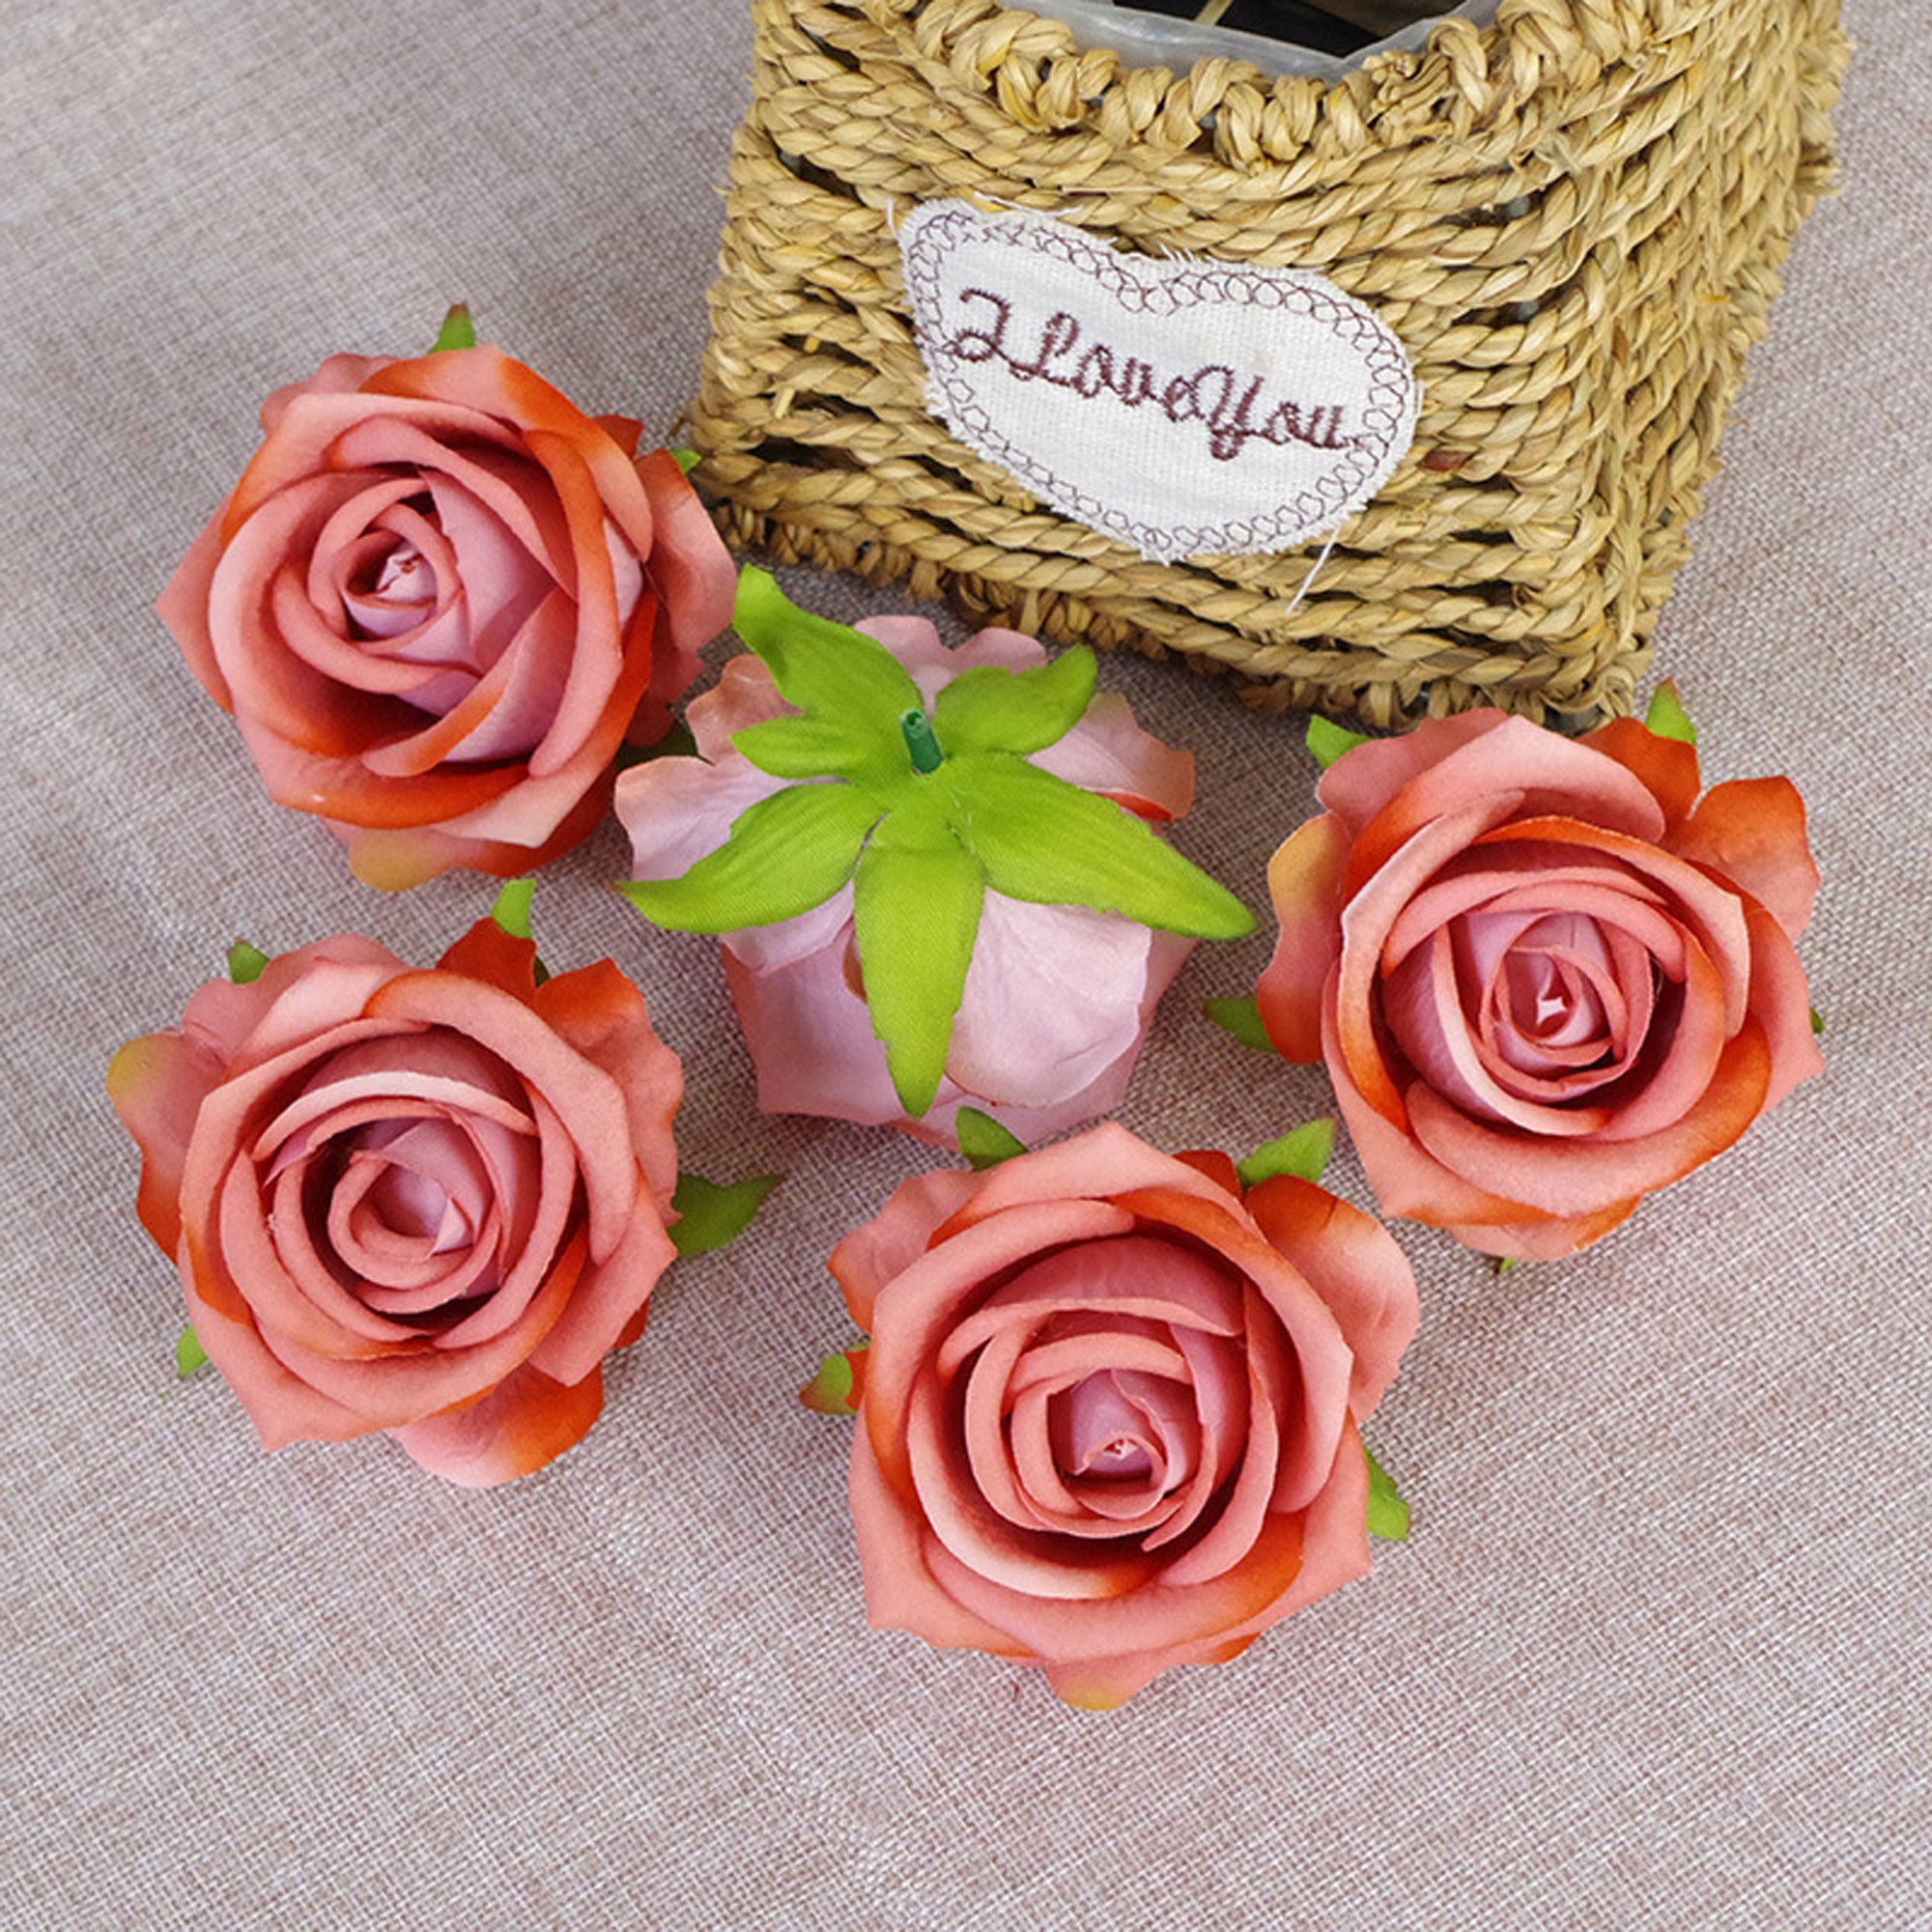 Wholesale Silk Roses Artificial Flowers 2.7 inch